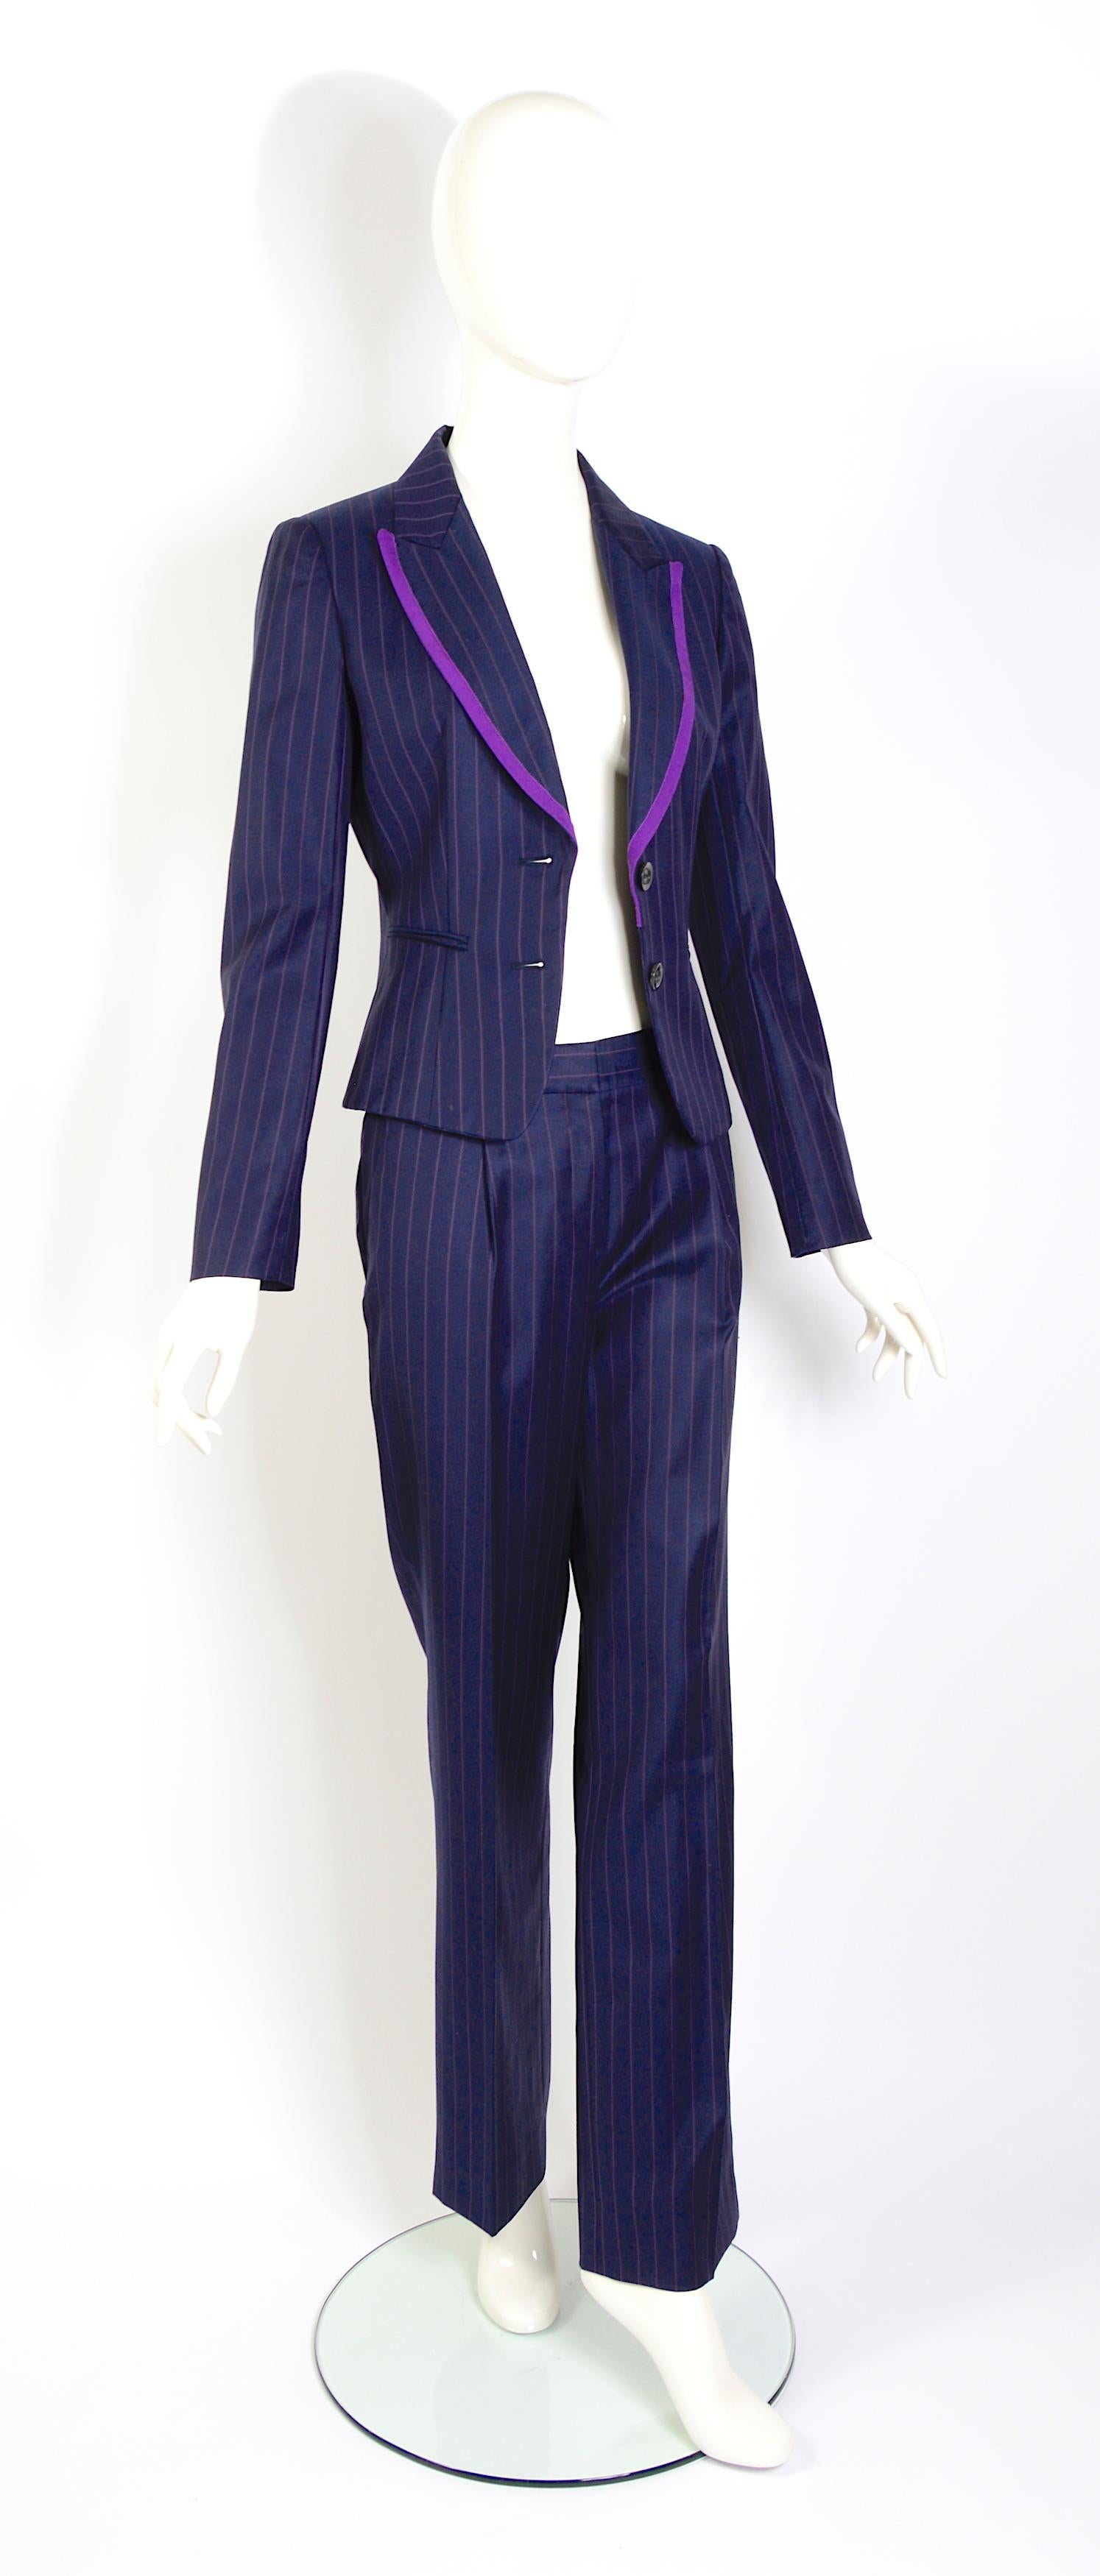 Christian Dior by John Galliano vintage S/S 2008 pin striped suit 7